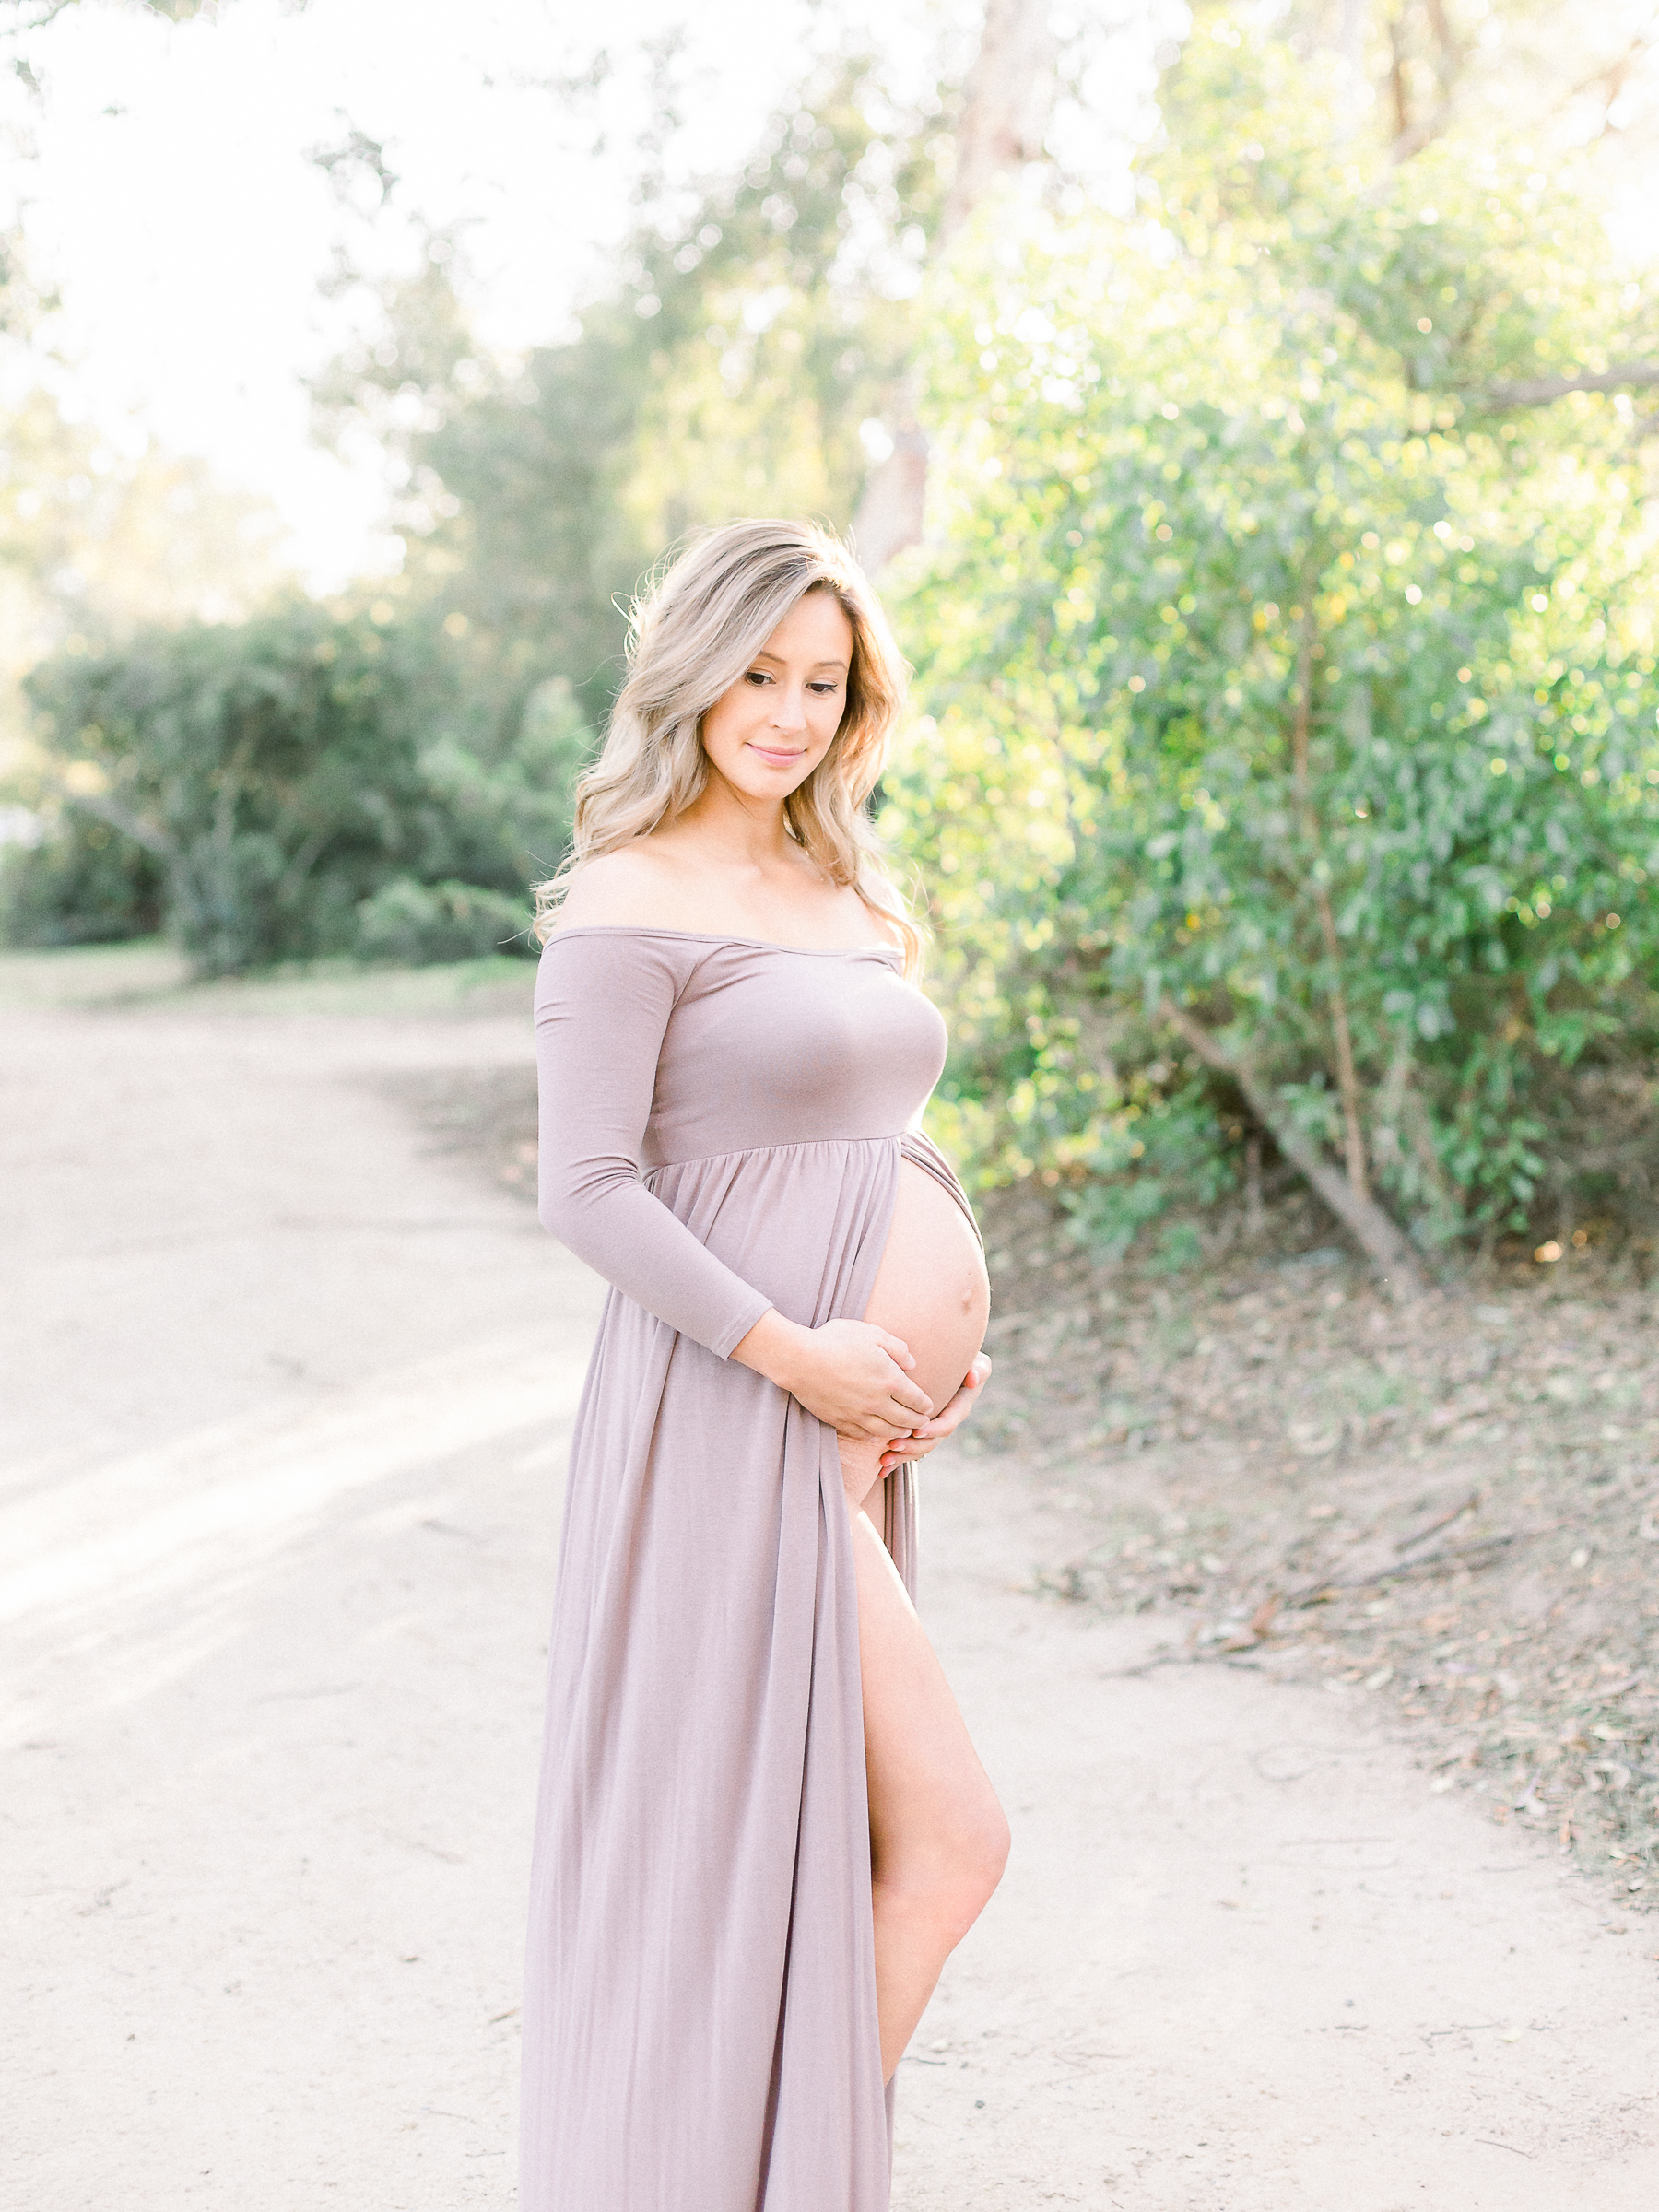 Pregnant woman wearing maternity dress photographed at the park